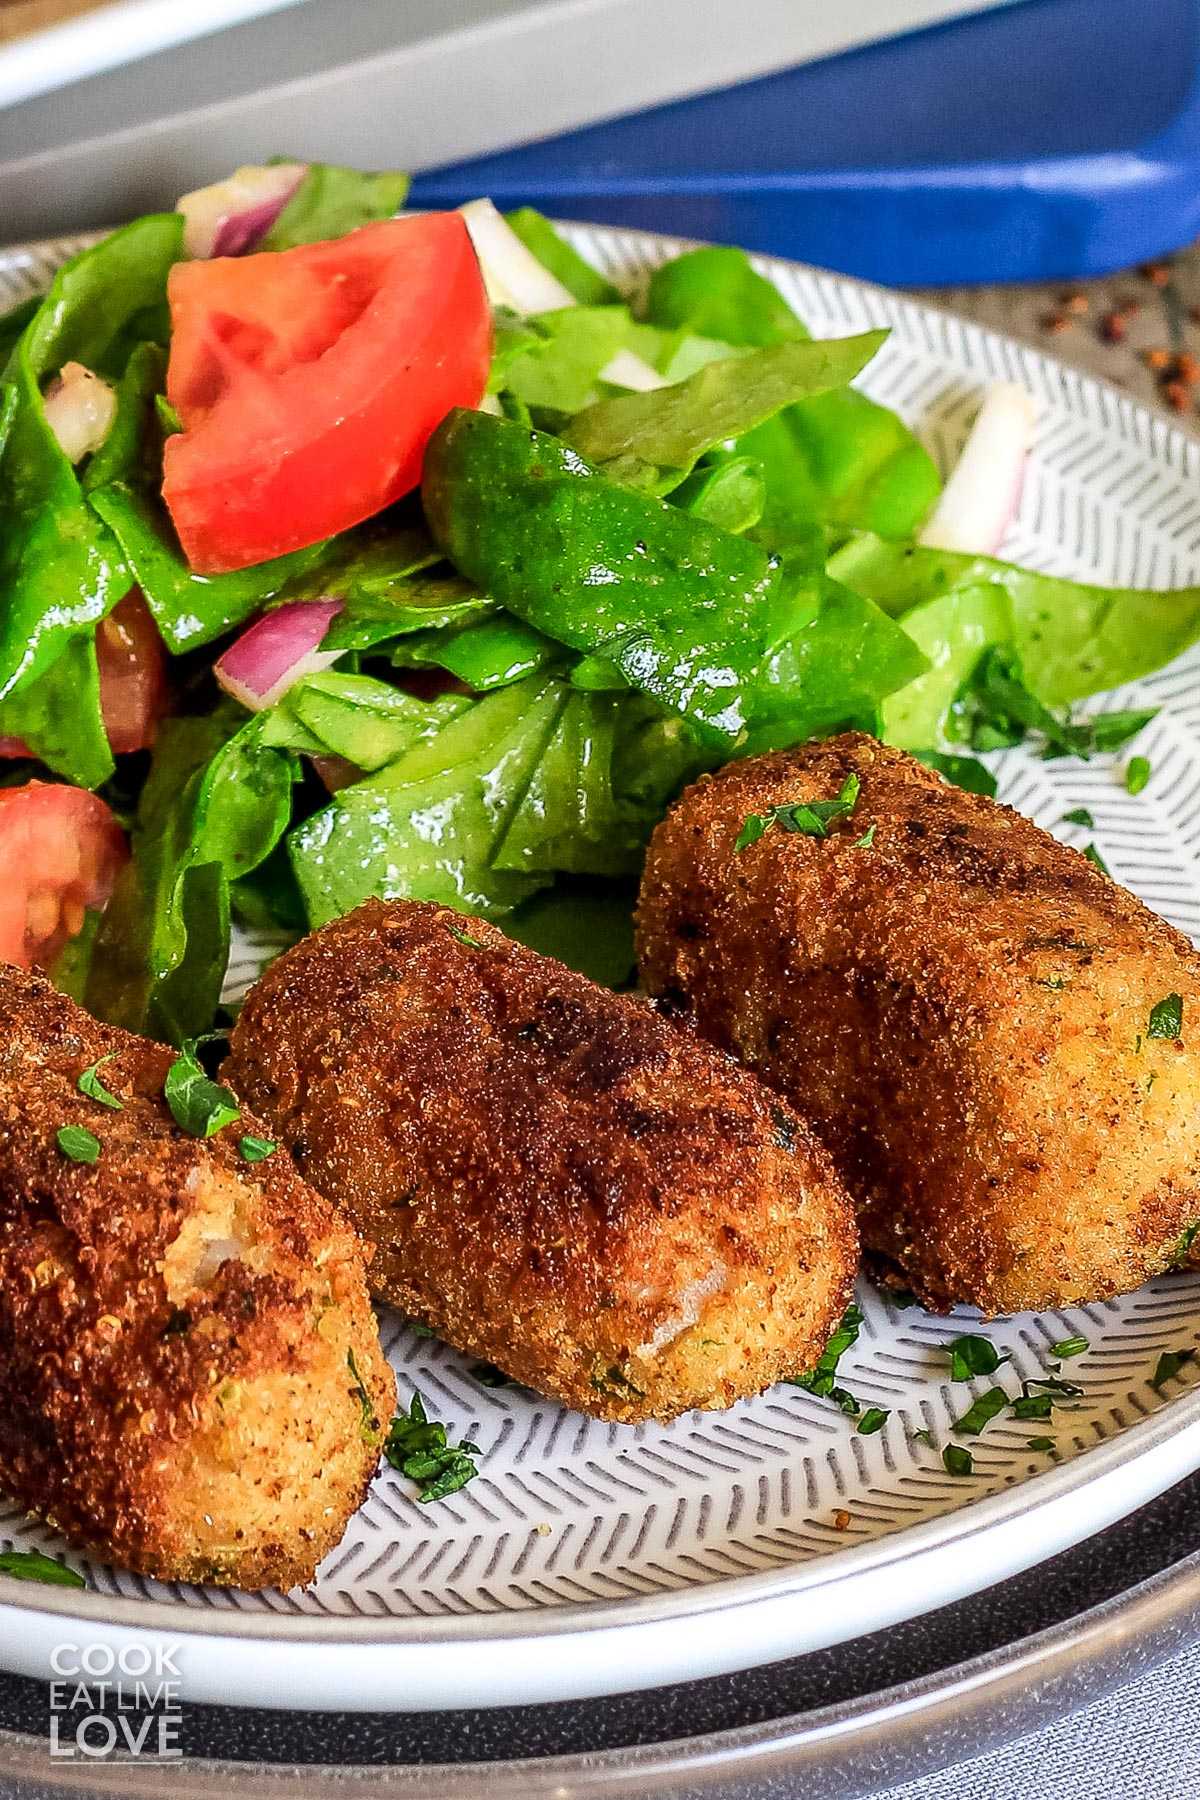 Cooked potato croquettes on plate ready to eat with a salad in the background of the plate.